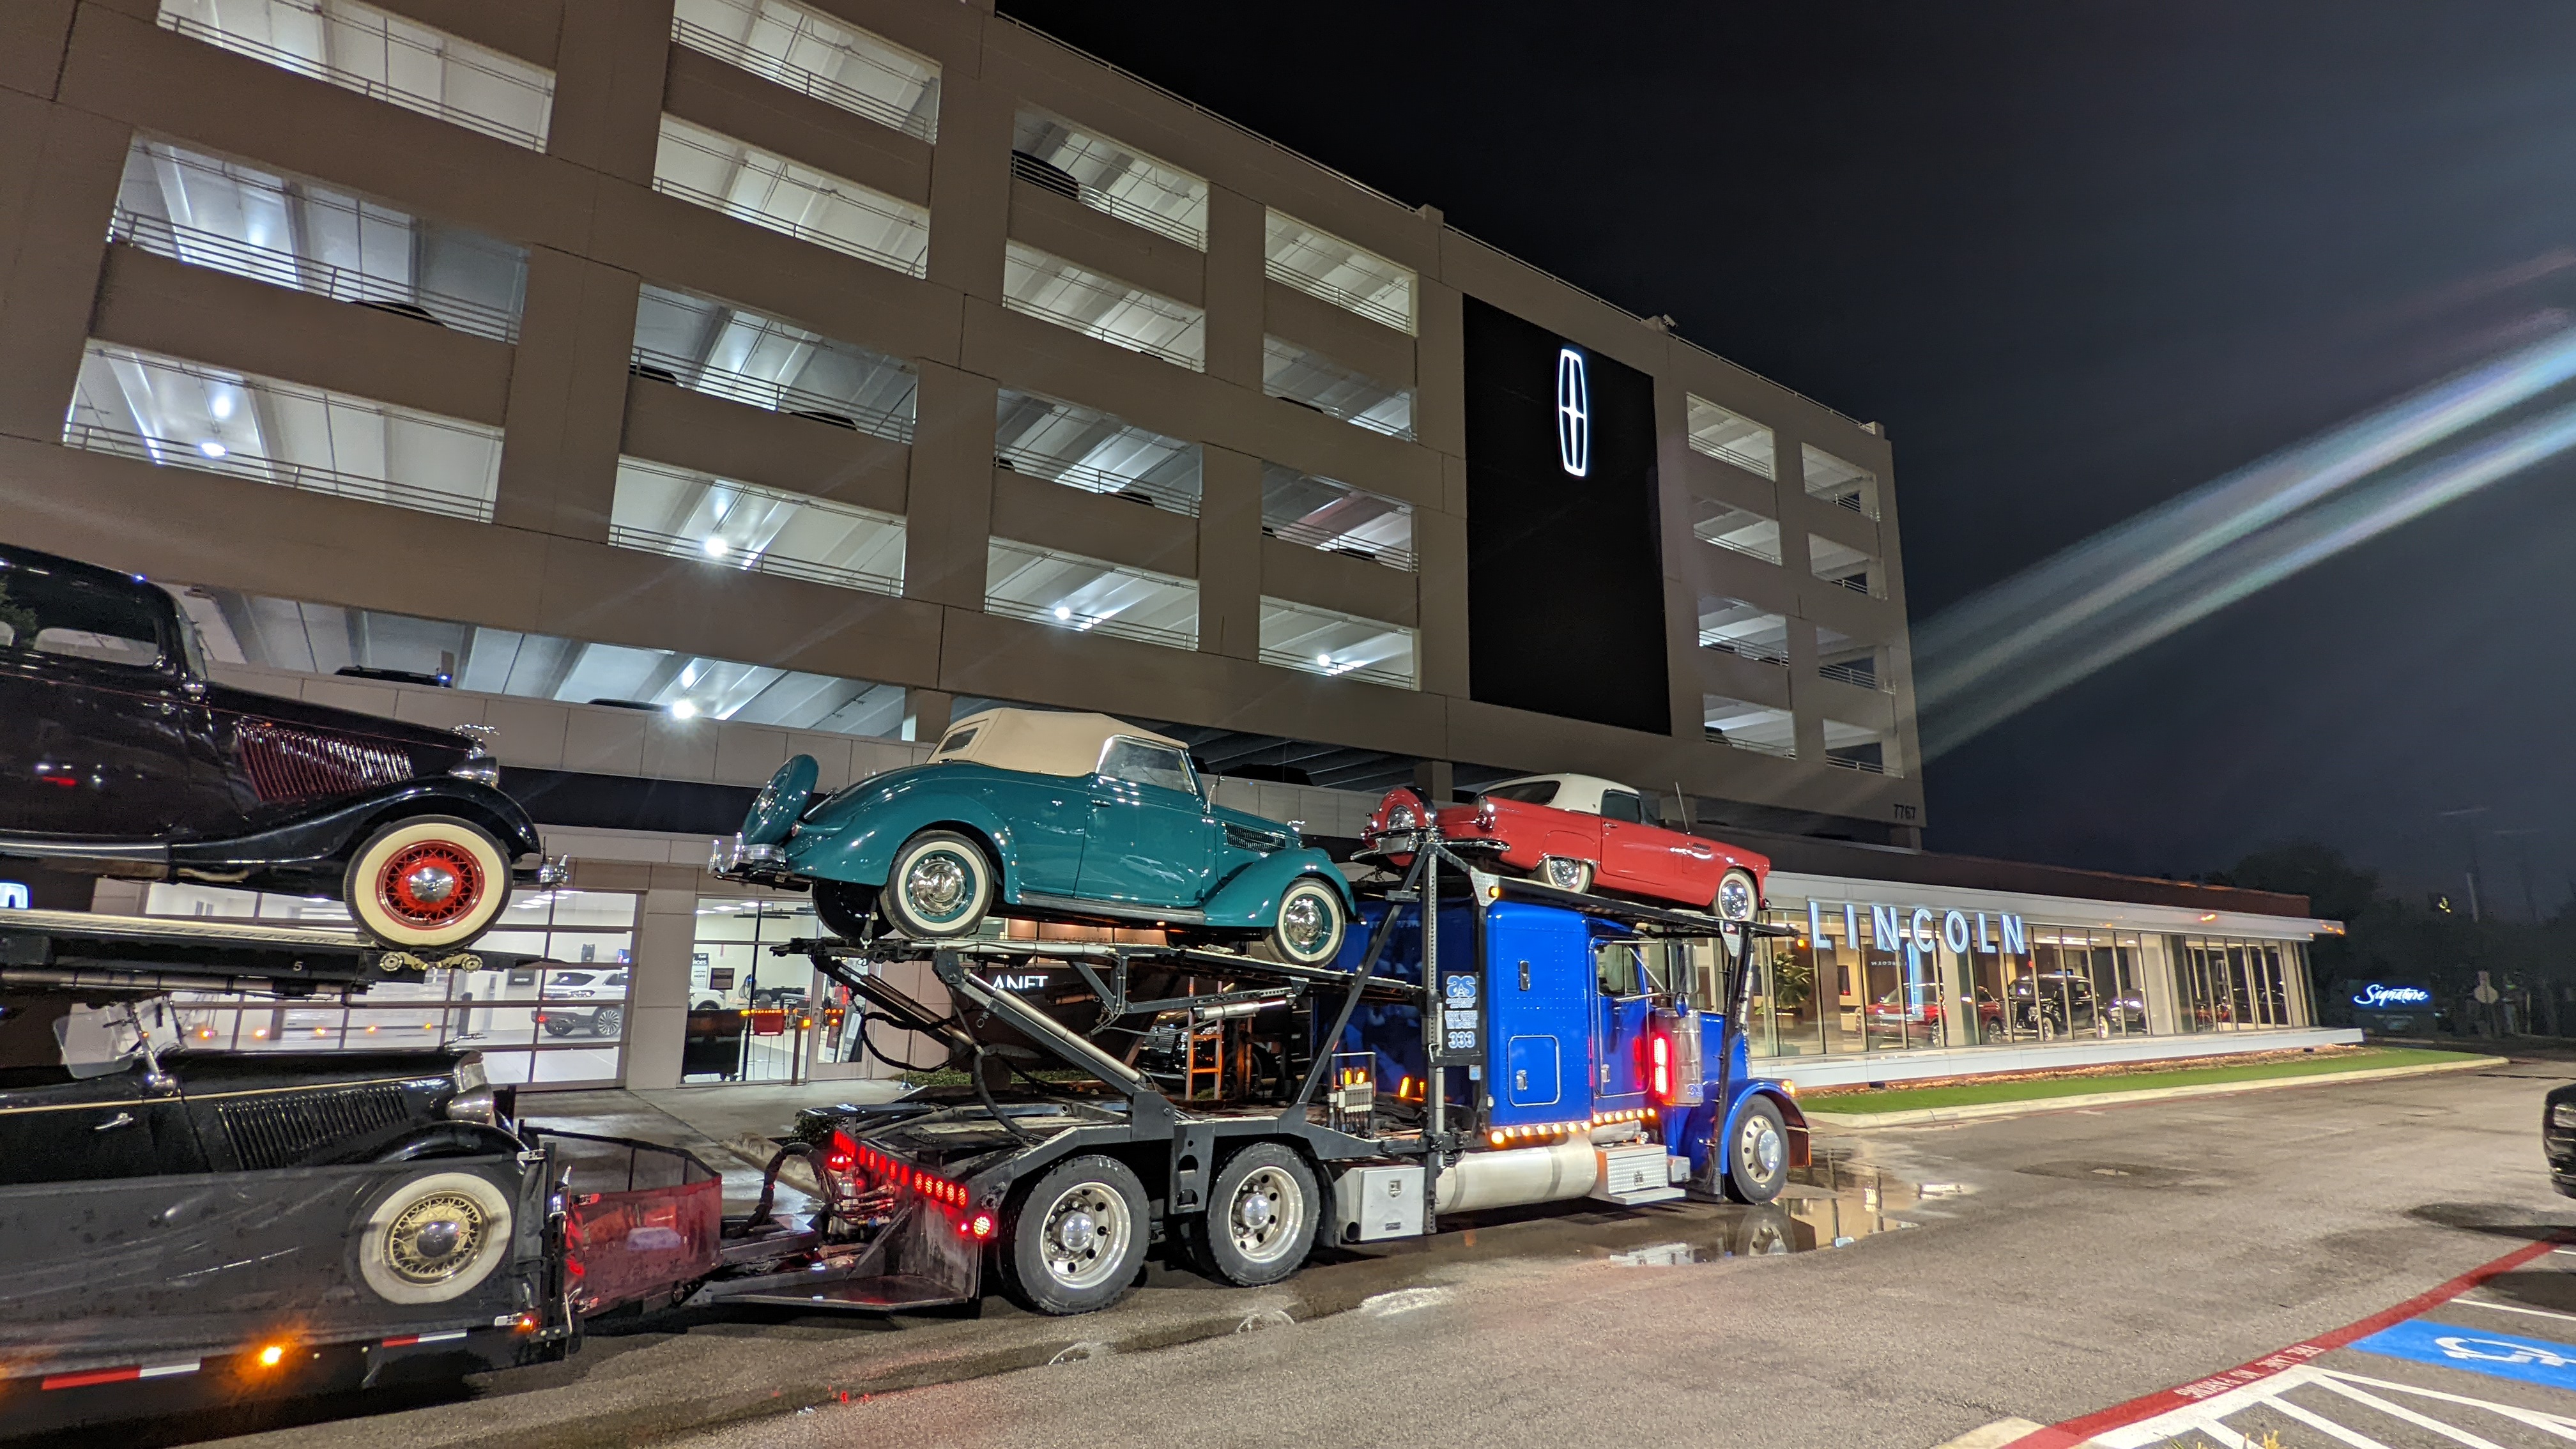 TOURS OF THE “MILES OF MOTORS” CLASSIC CAR COLLECTION – FEATURING 200-PLUS VINTAGE AUTOMOBILES FROM 1920 ON – OFFERED AUG. 27 AT PLANET LINCOLN DALLAS LOVE FIELD